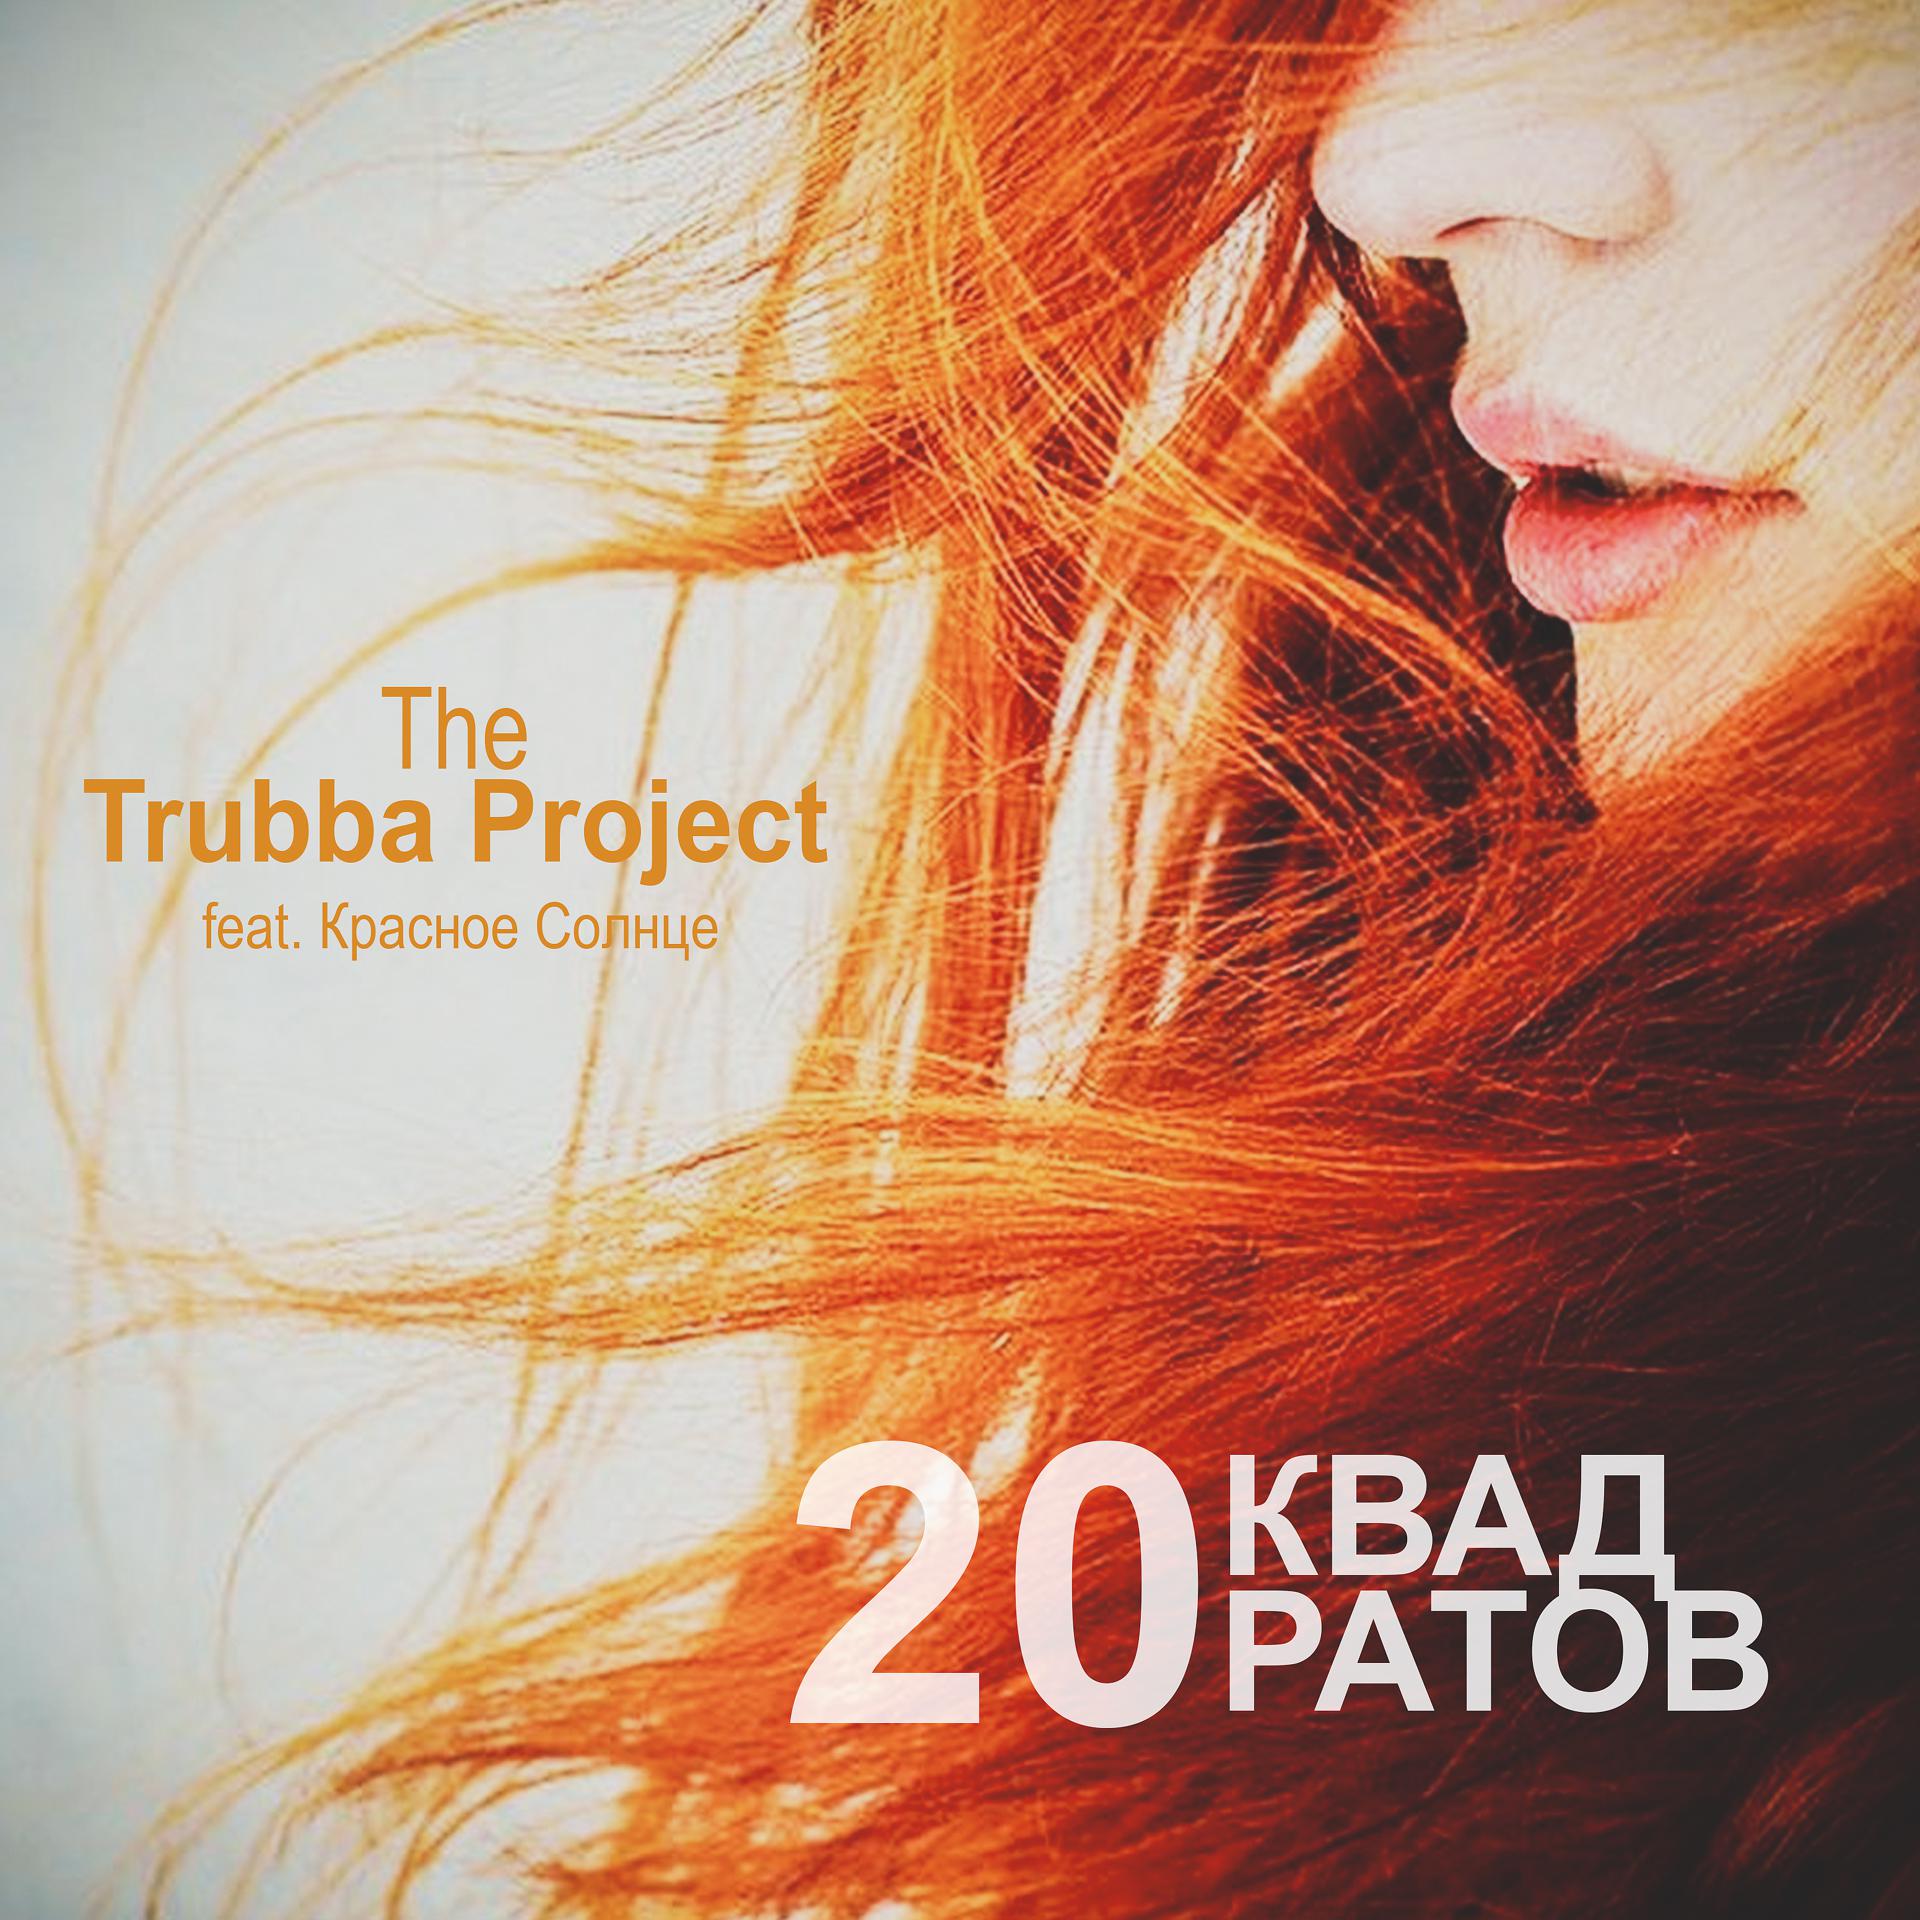 Солнце feat. The Trubba Project.